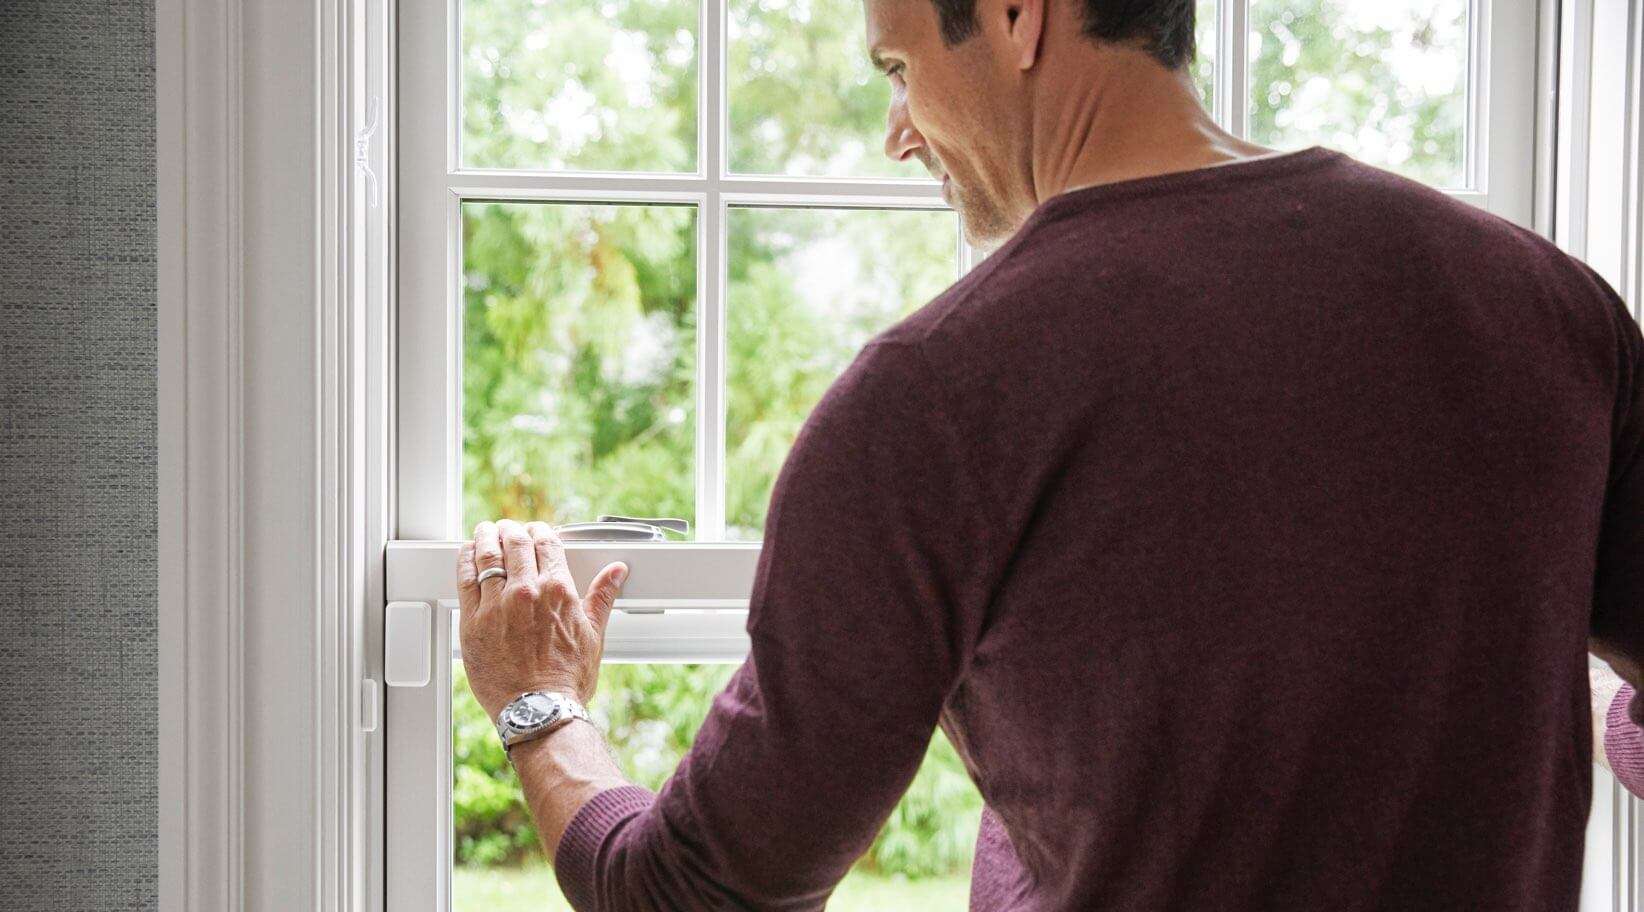 Consumer Reports Home Security Systems 2015